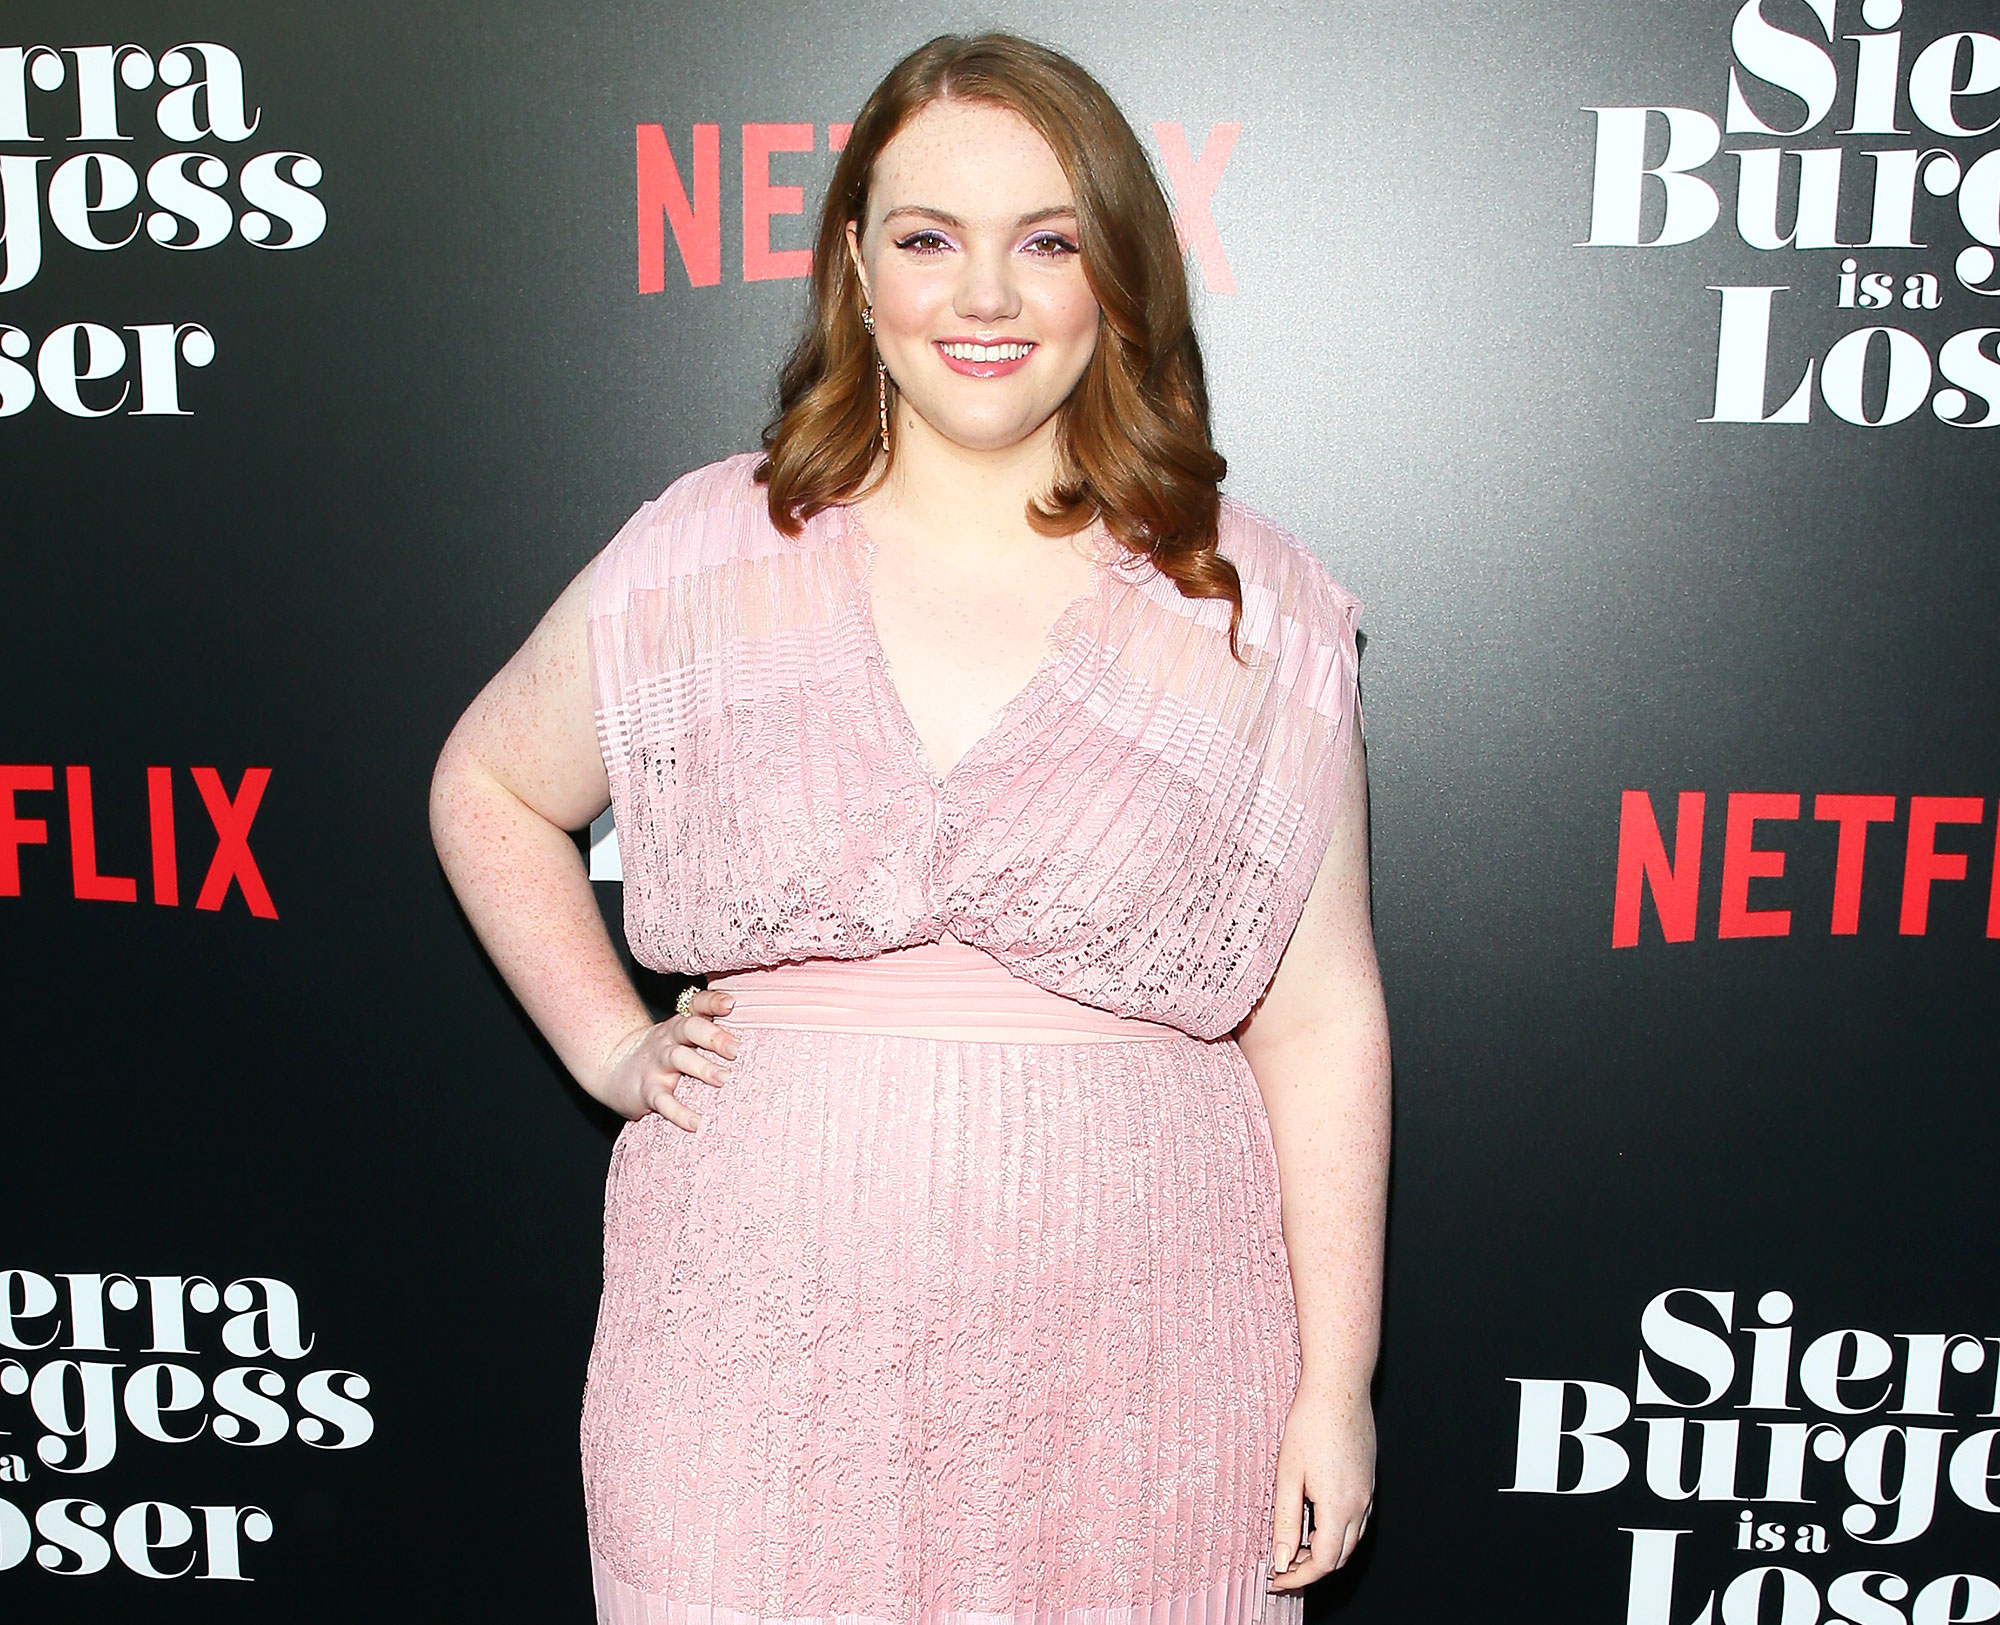 Stranger Things' Shannon Purser To Star In 'Sierra Burgess Is A